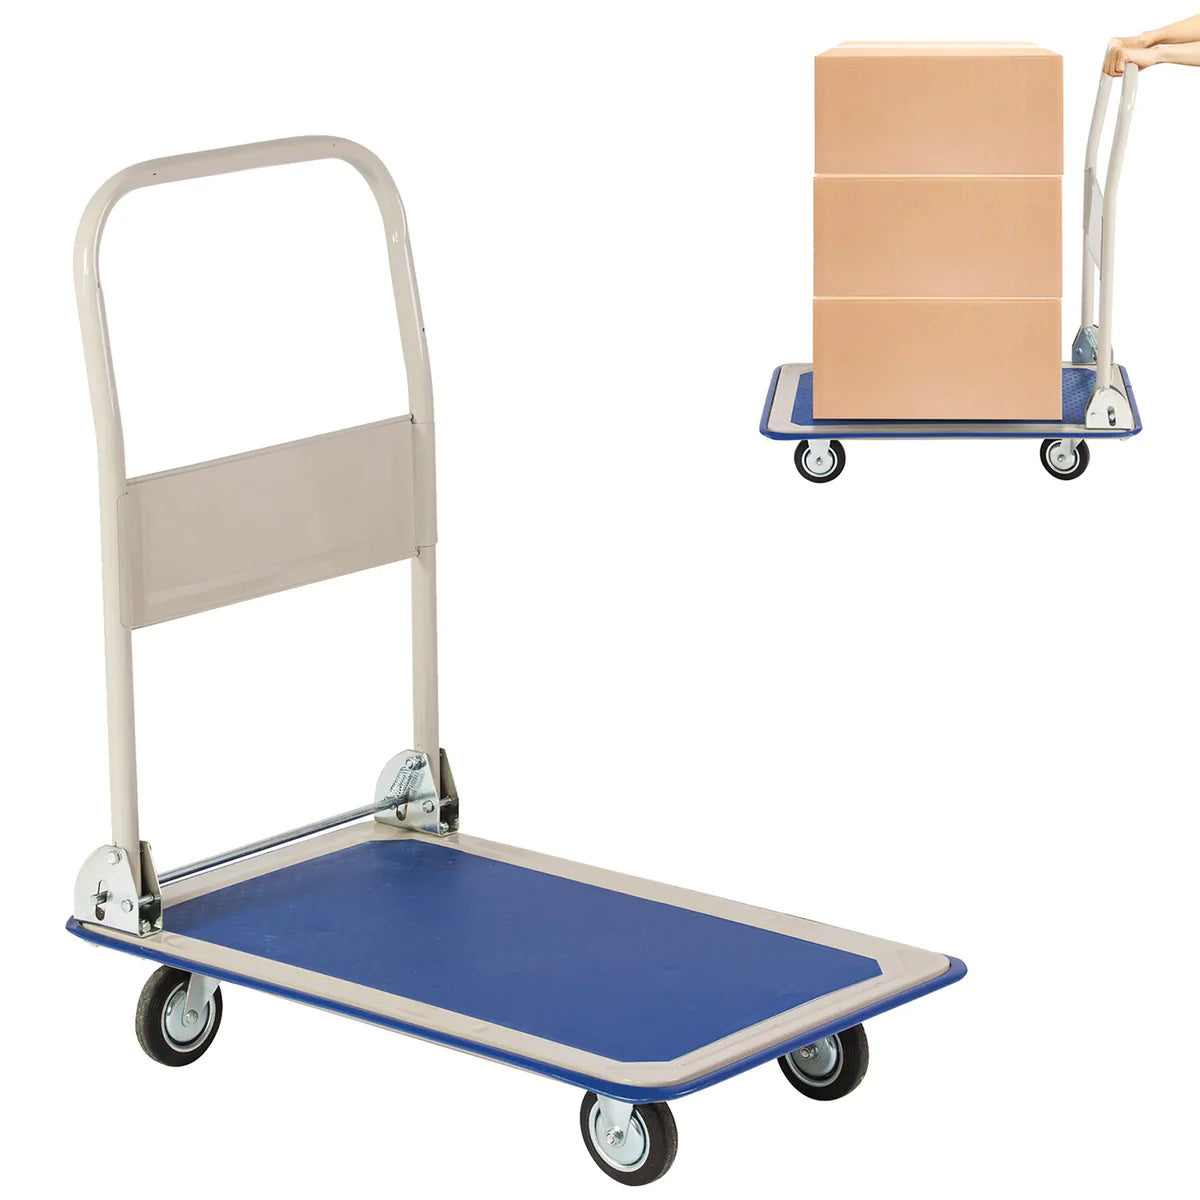 Collapsible Platform Cart Hand Truck Moving Push Flatbed Trolley, 330lbs Capacity